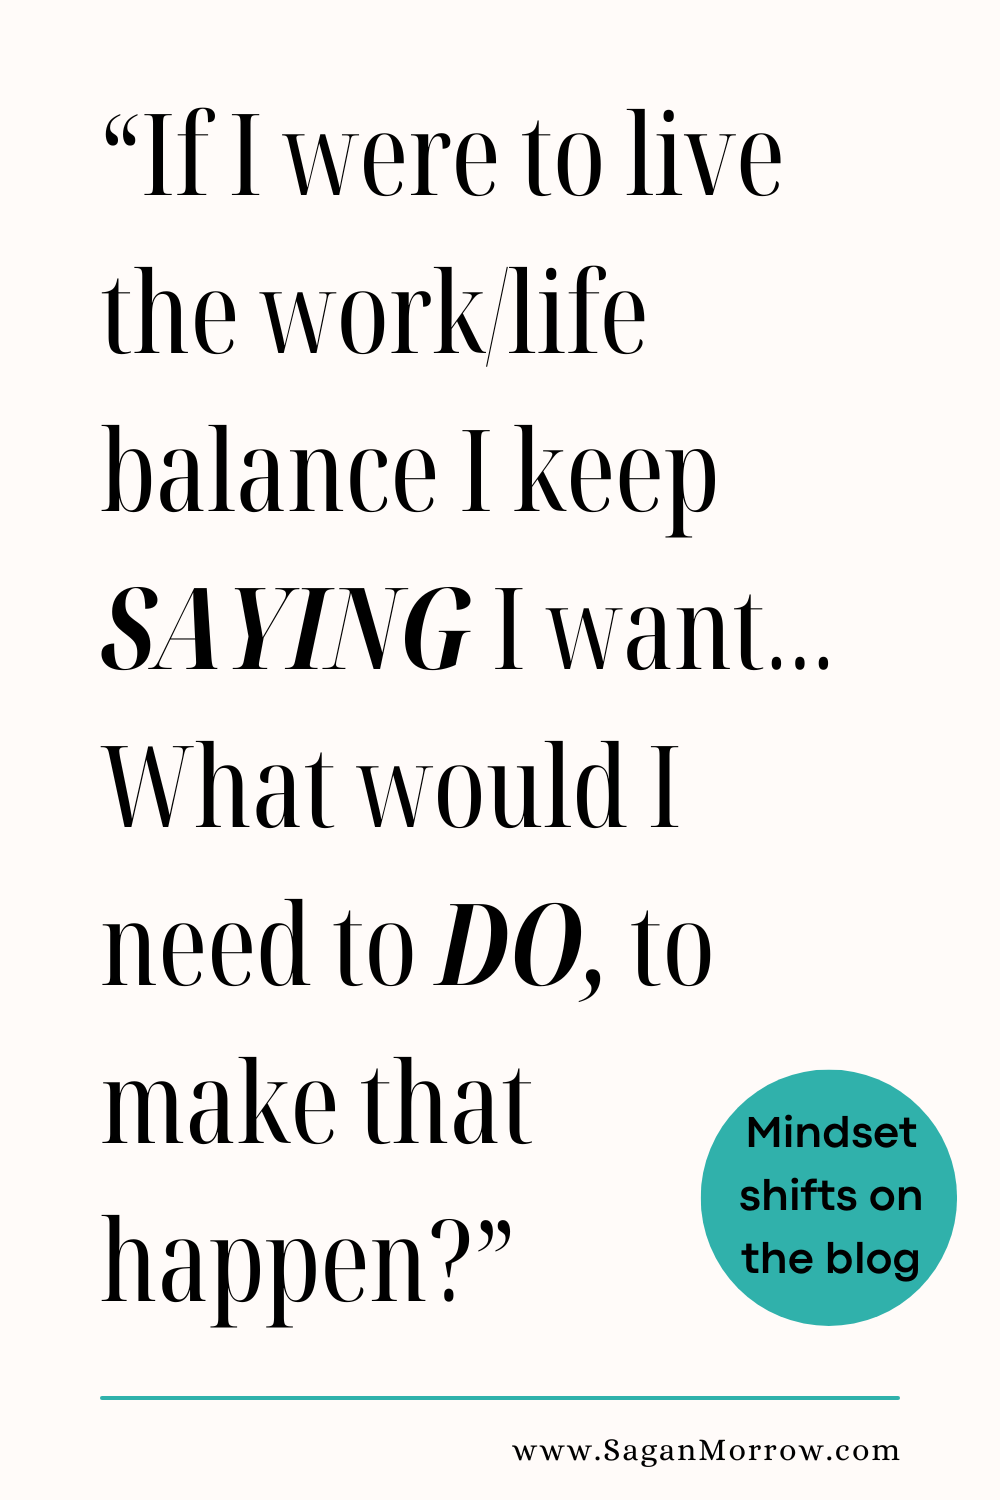 "If I were to live the work life balance I keep SAYING I want... What would I need to DO, to make that happen?" quotes about work life balance mindset